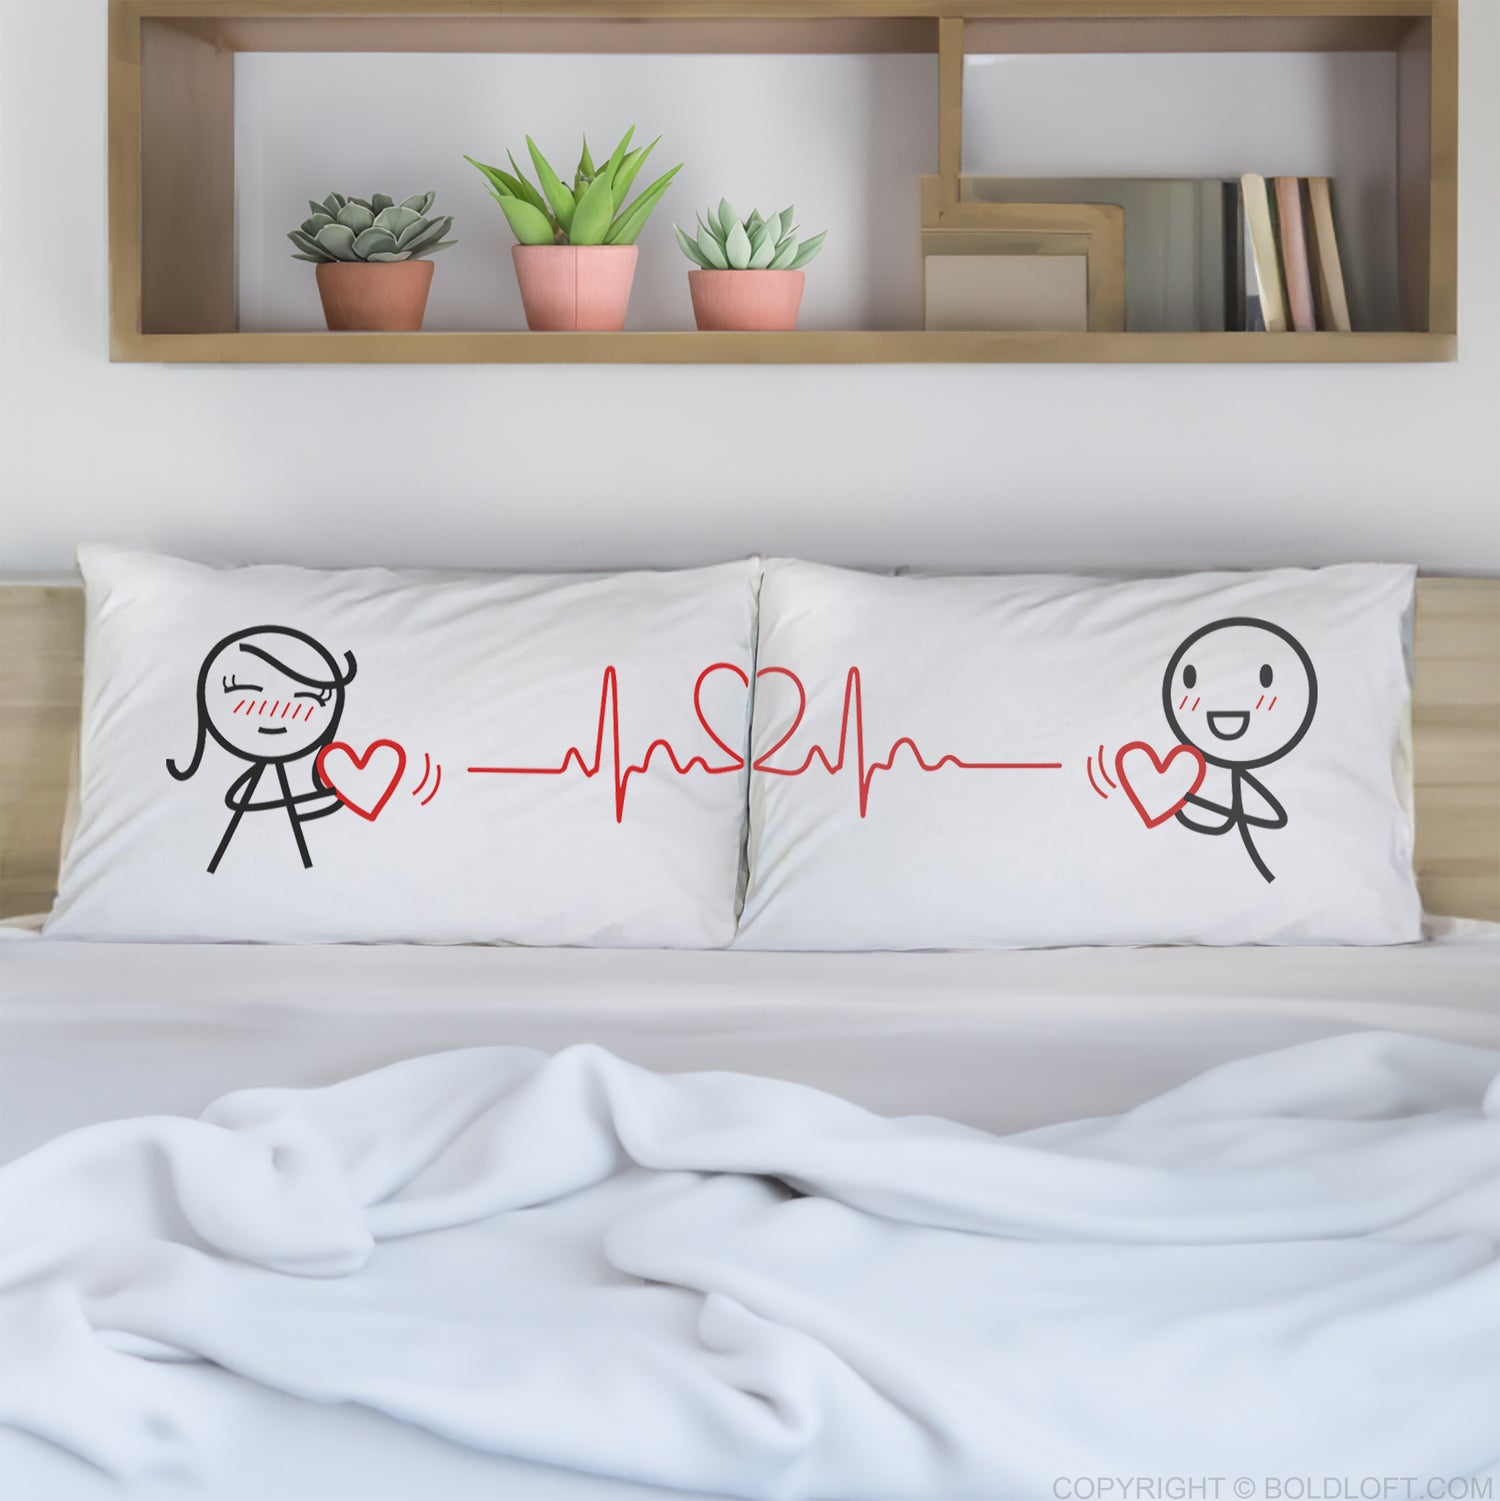 BoldLoft Beat of My Heart Couple Pillowcases, these covers embody love, complemented by a heartfelt gesture between 2 stick figures.